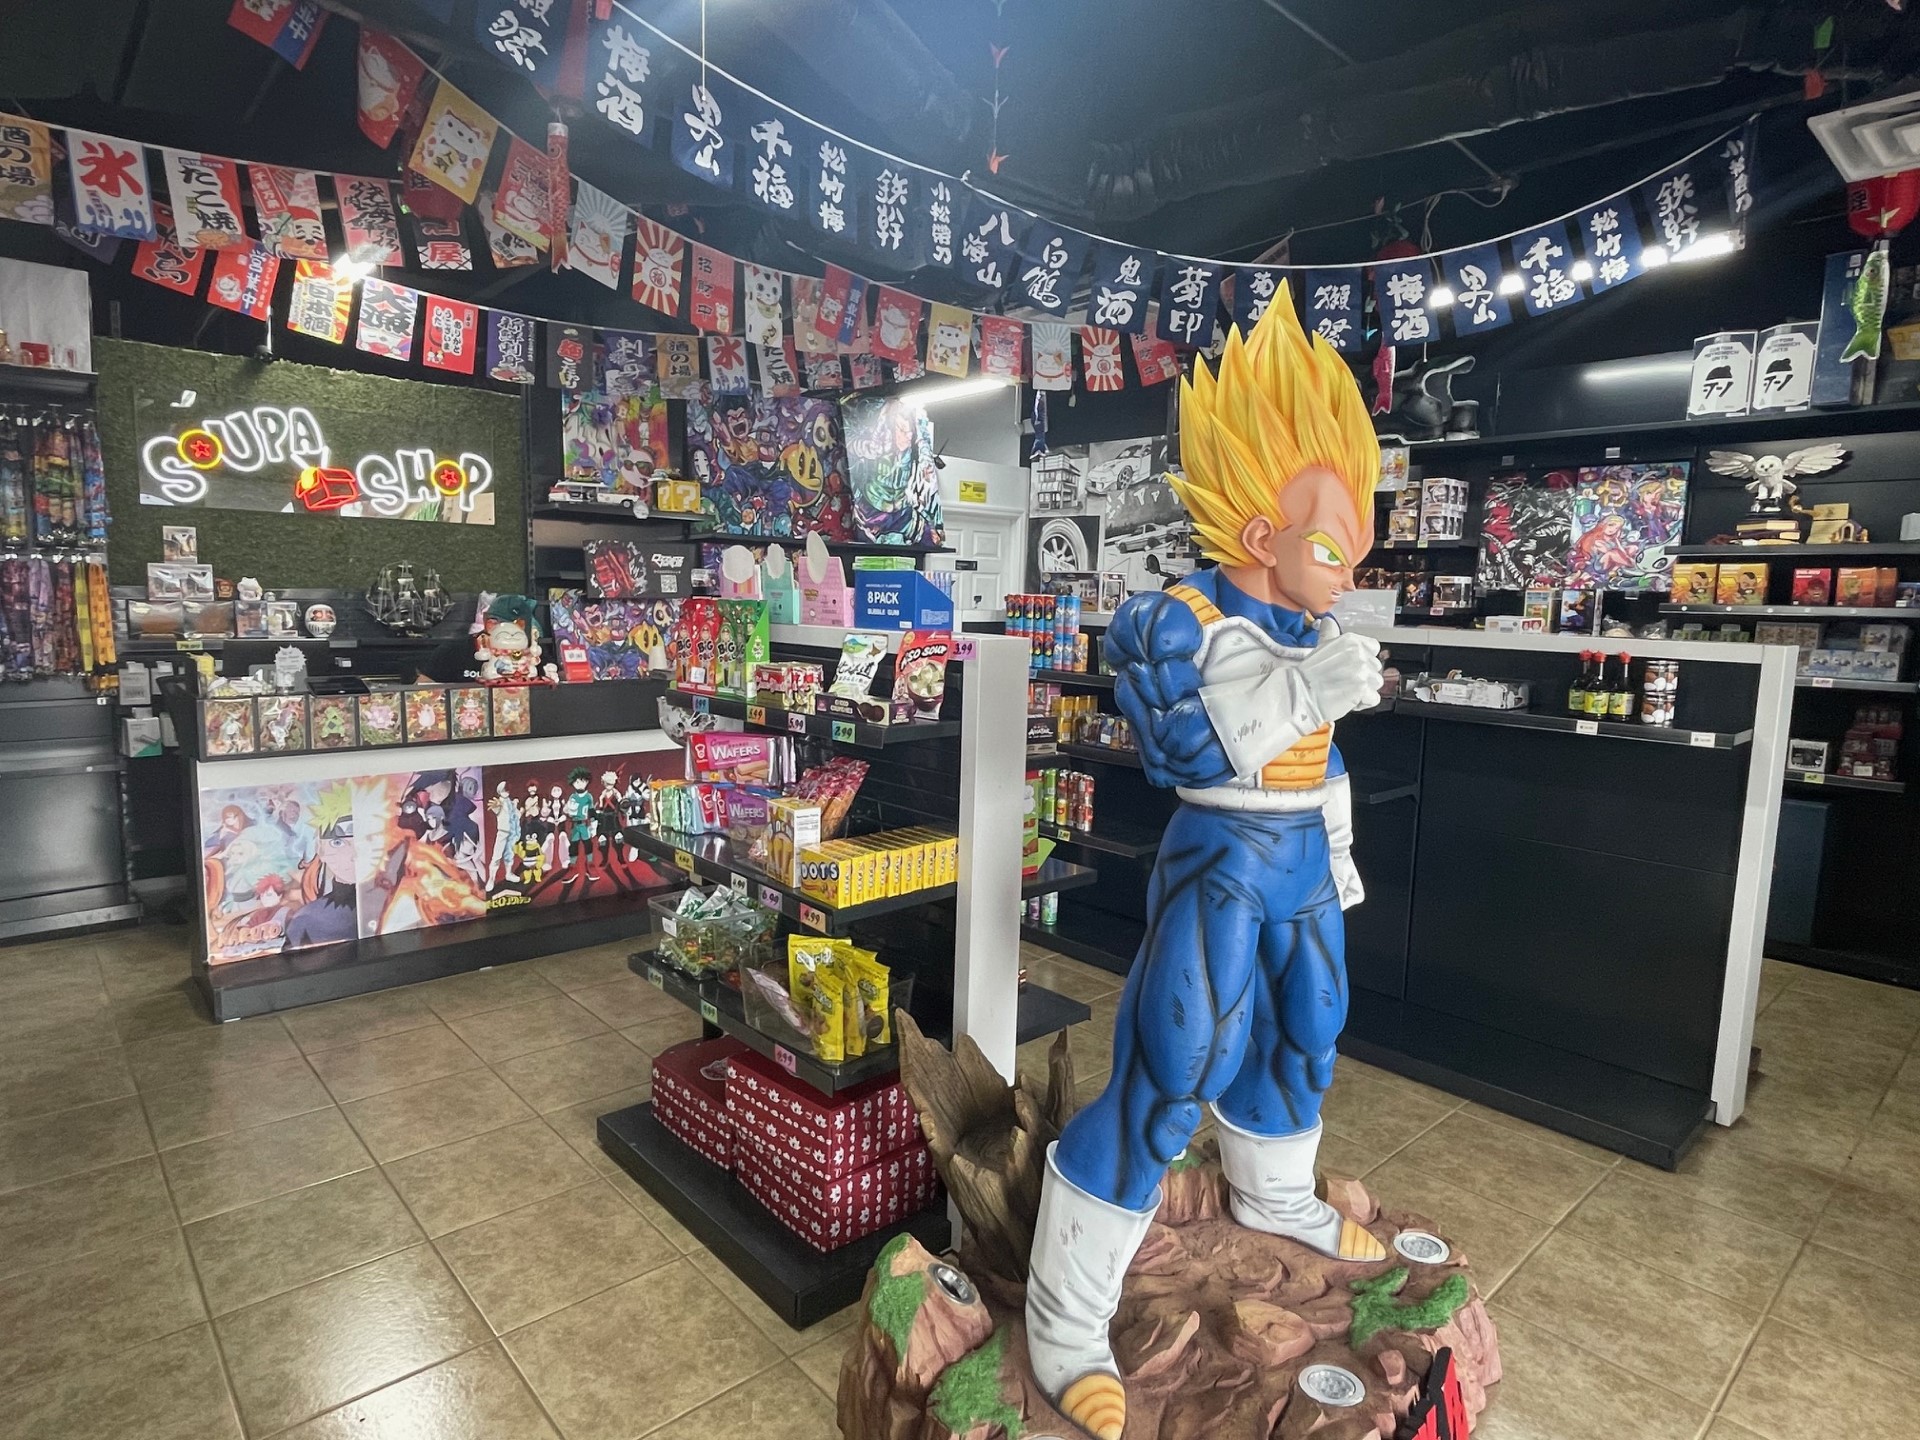 Theres a ramen shop in Orlando Florida called Naroodle and it looks  pretty cool  ranime